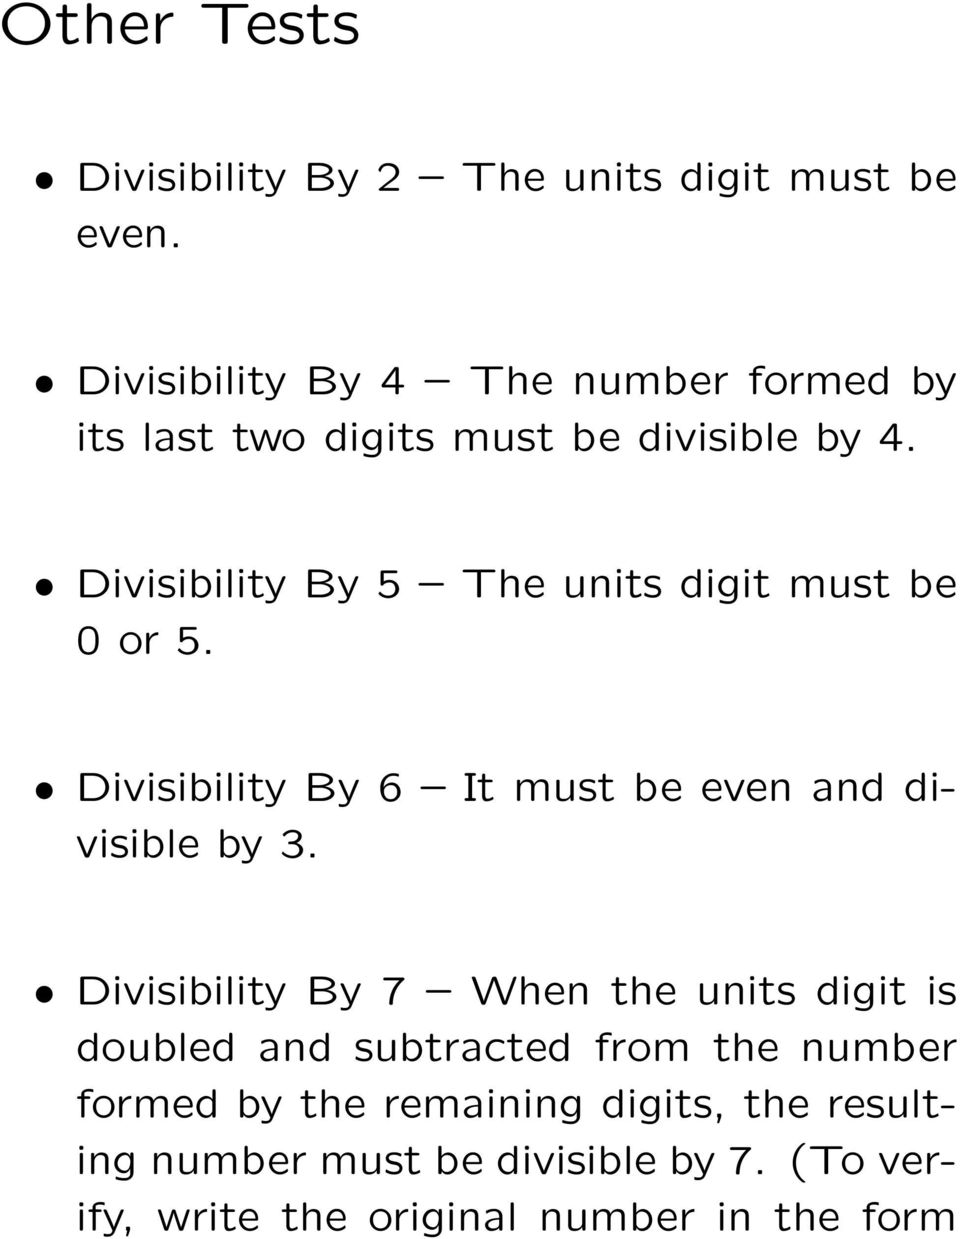 Divisibility By 5 The units digit must be 0 or 5. Divisibility By 6 It must be even and divisible by 3.